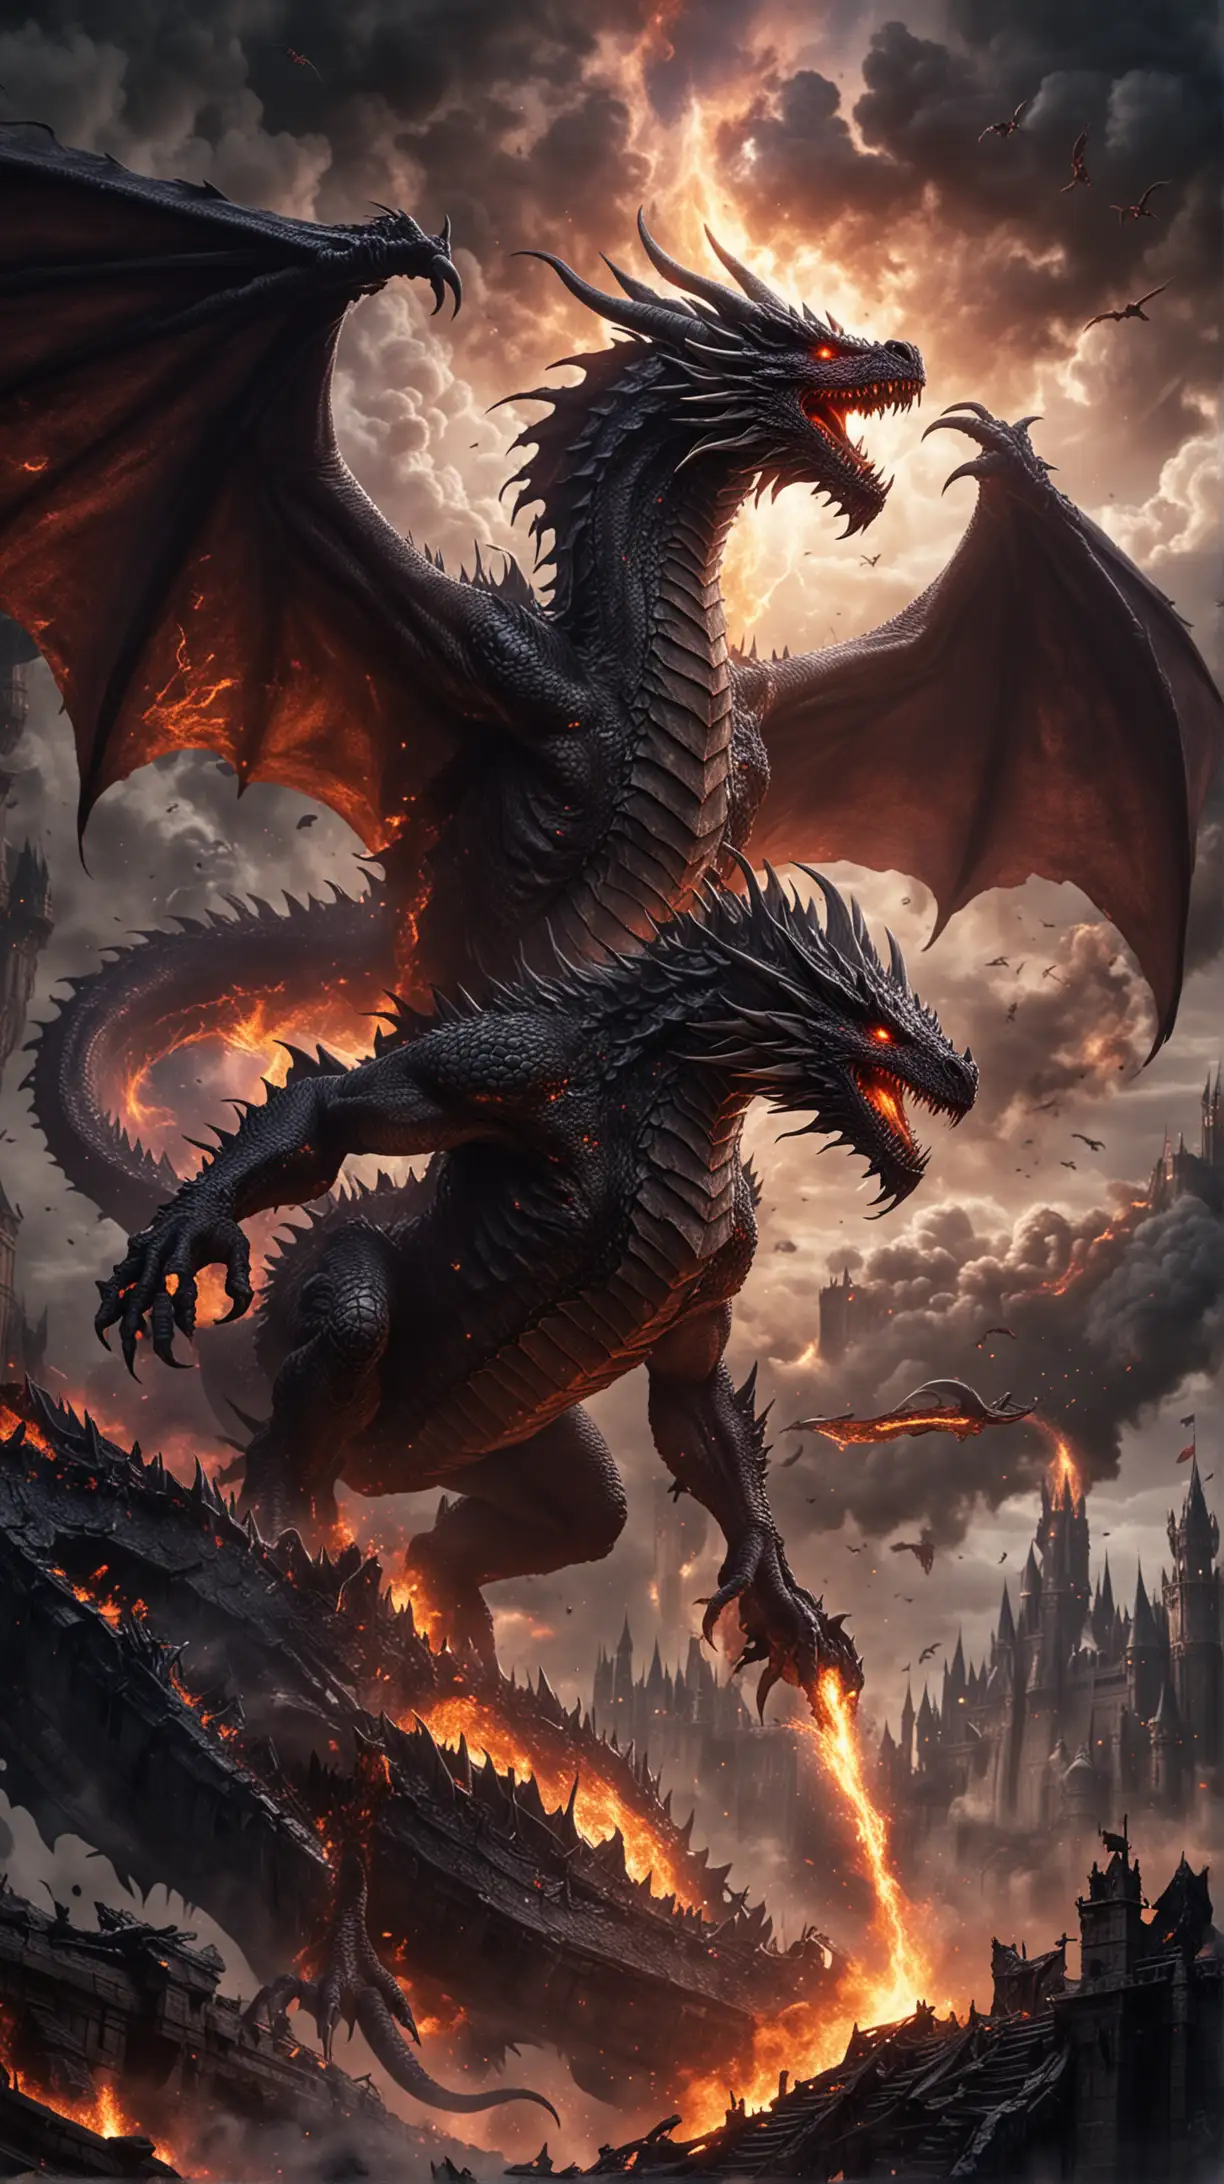 "A demonic dragon reigning over a cursed kingdom, its corrupted scales pulsating with dark energy as it spreads chaos and despair."

